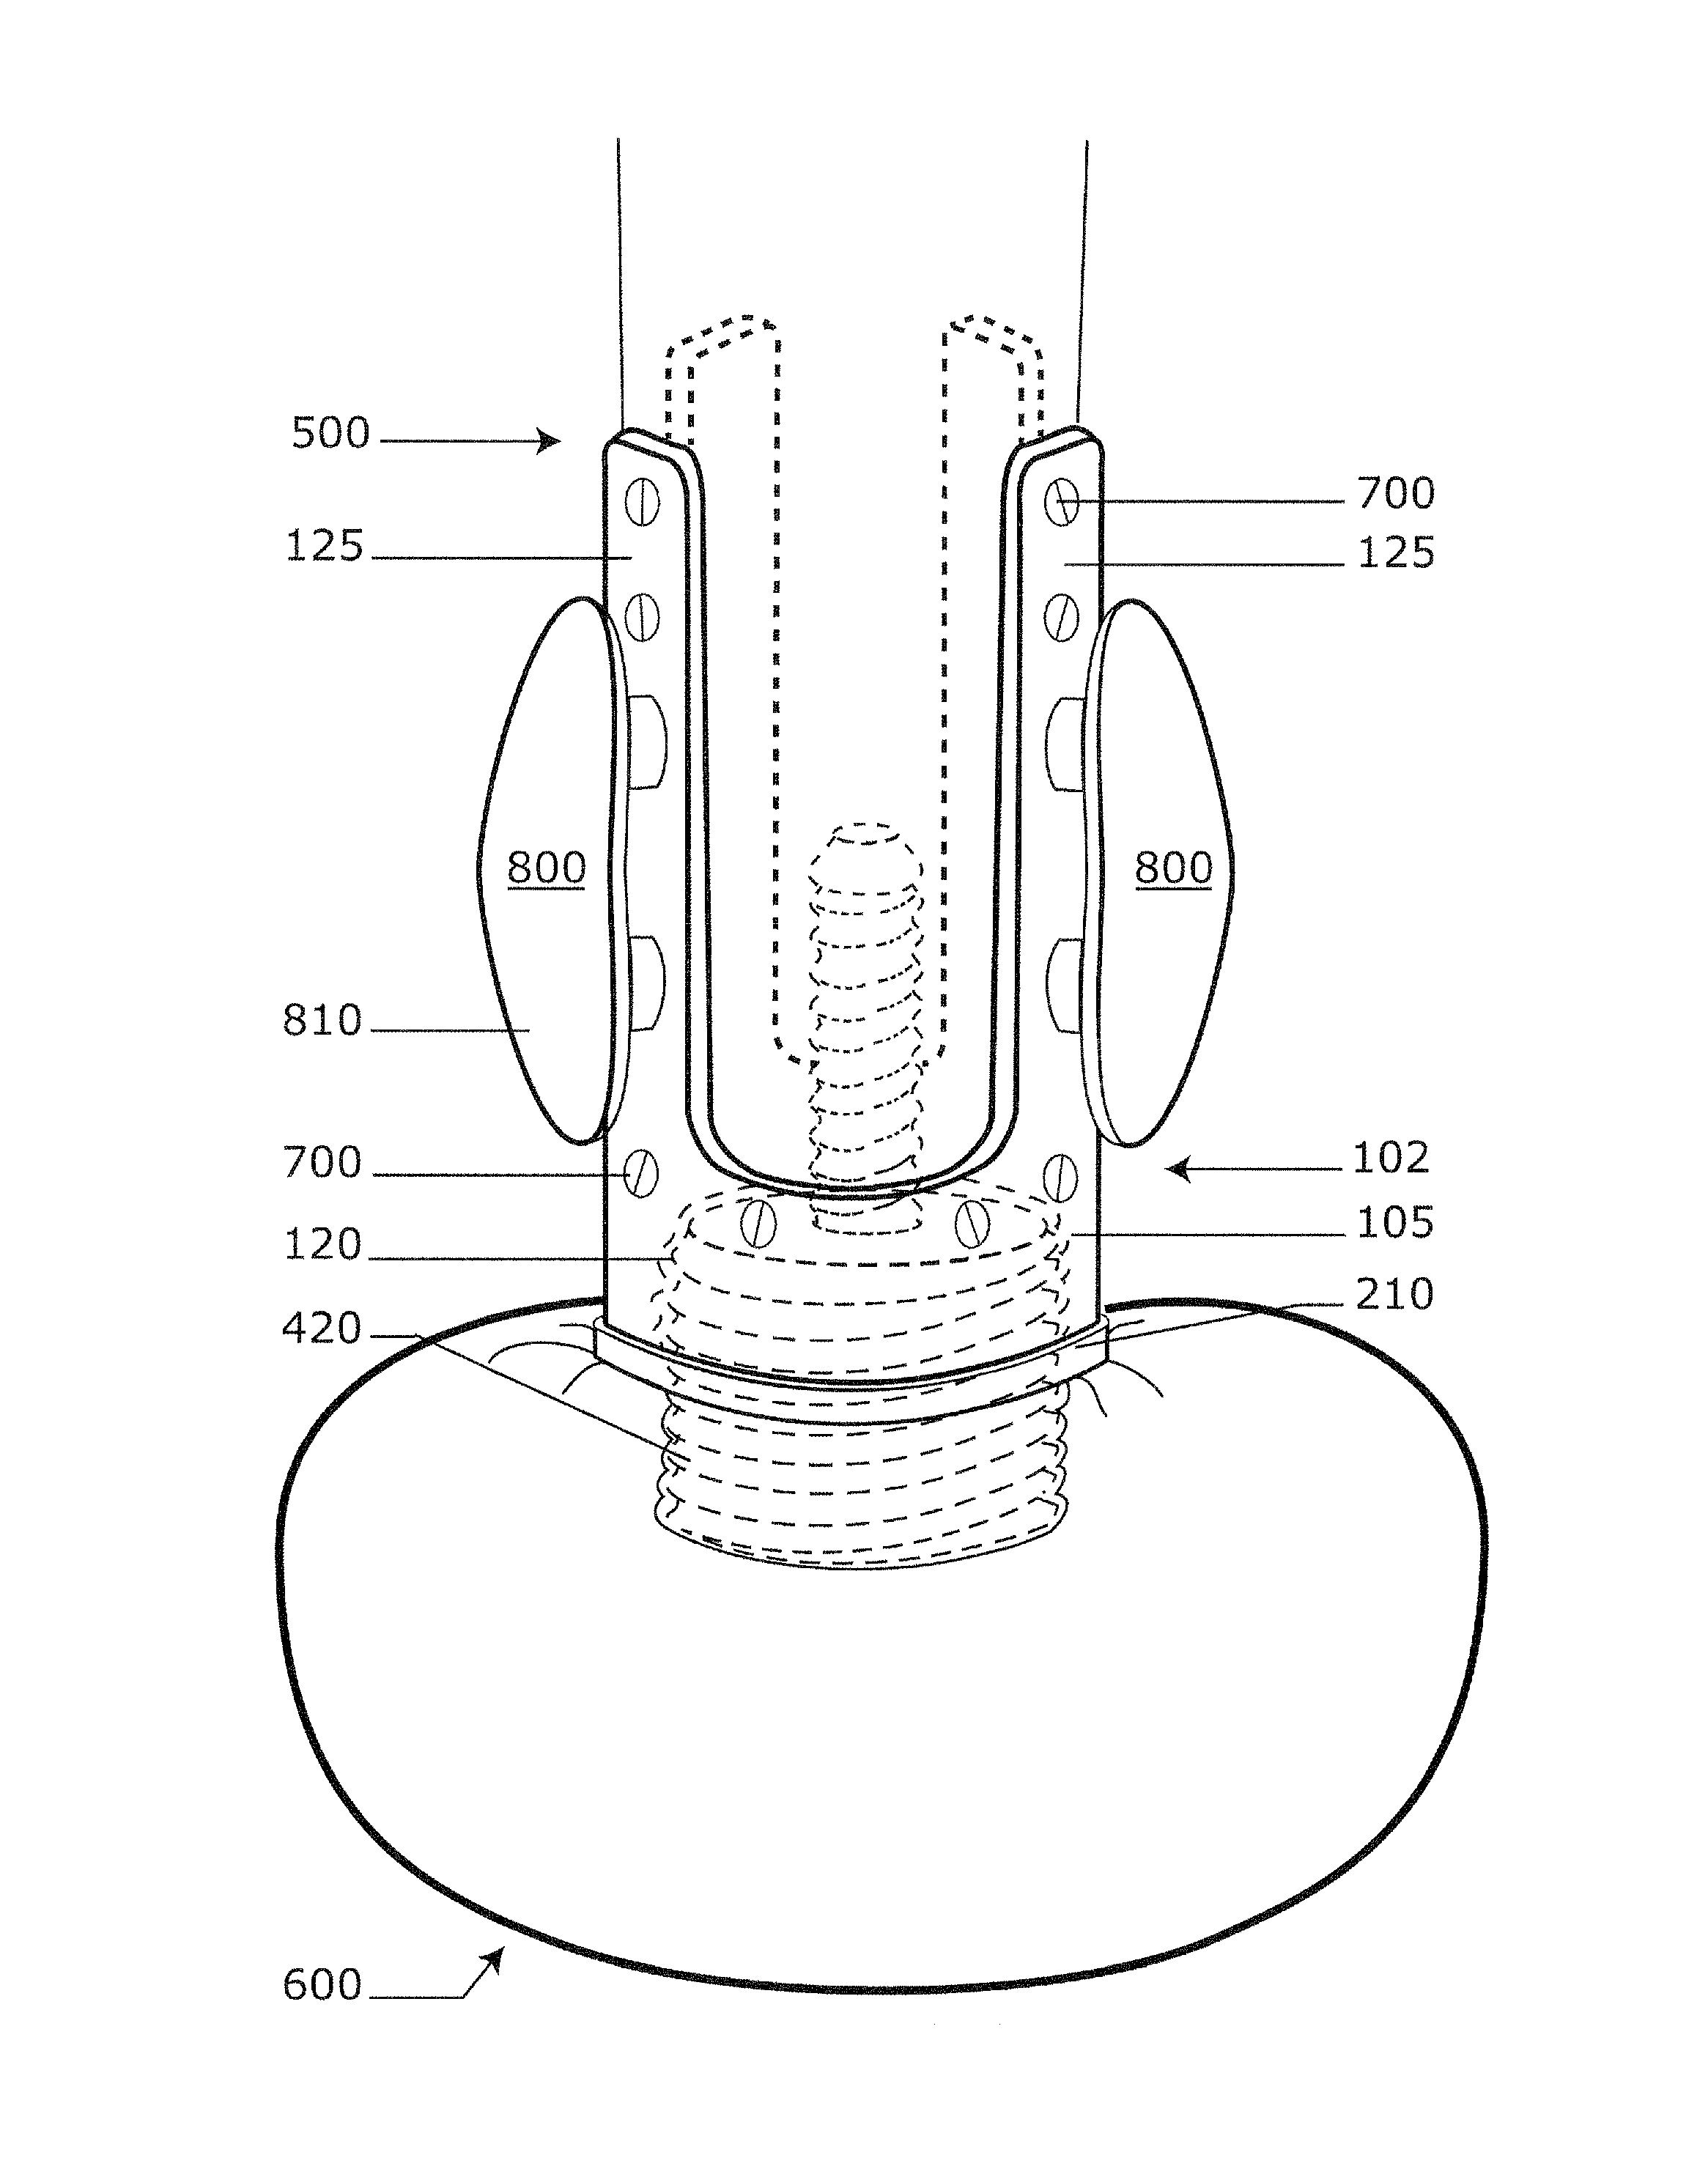 Implantable prosthetic device for distribution of weight on amputated limb and method of use with an external prosthetic device